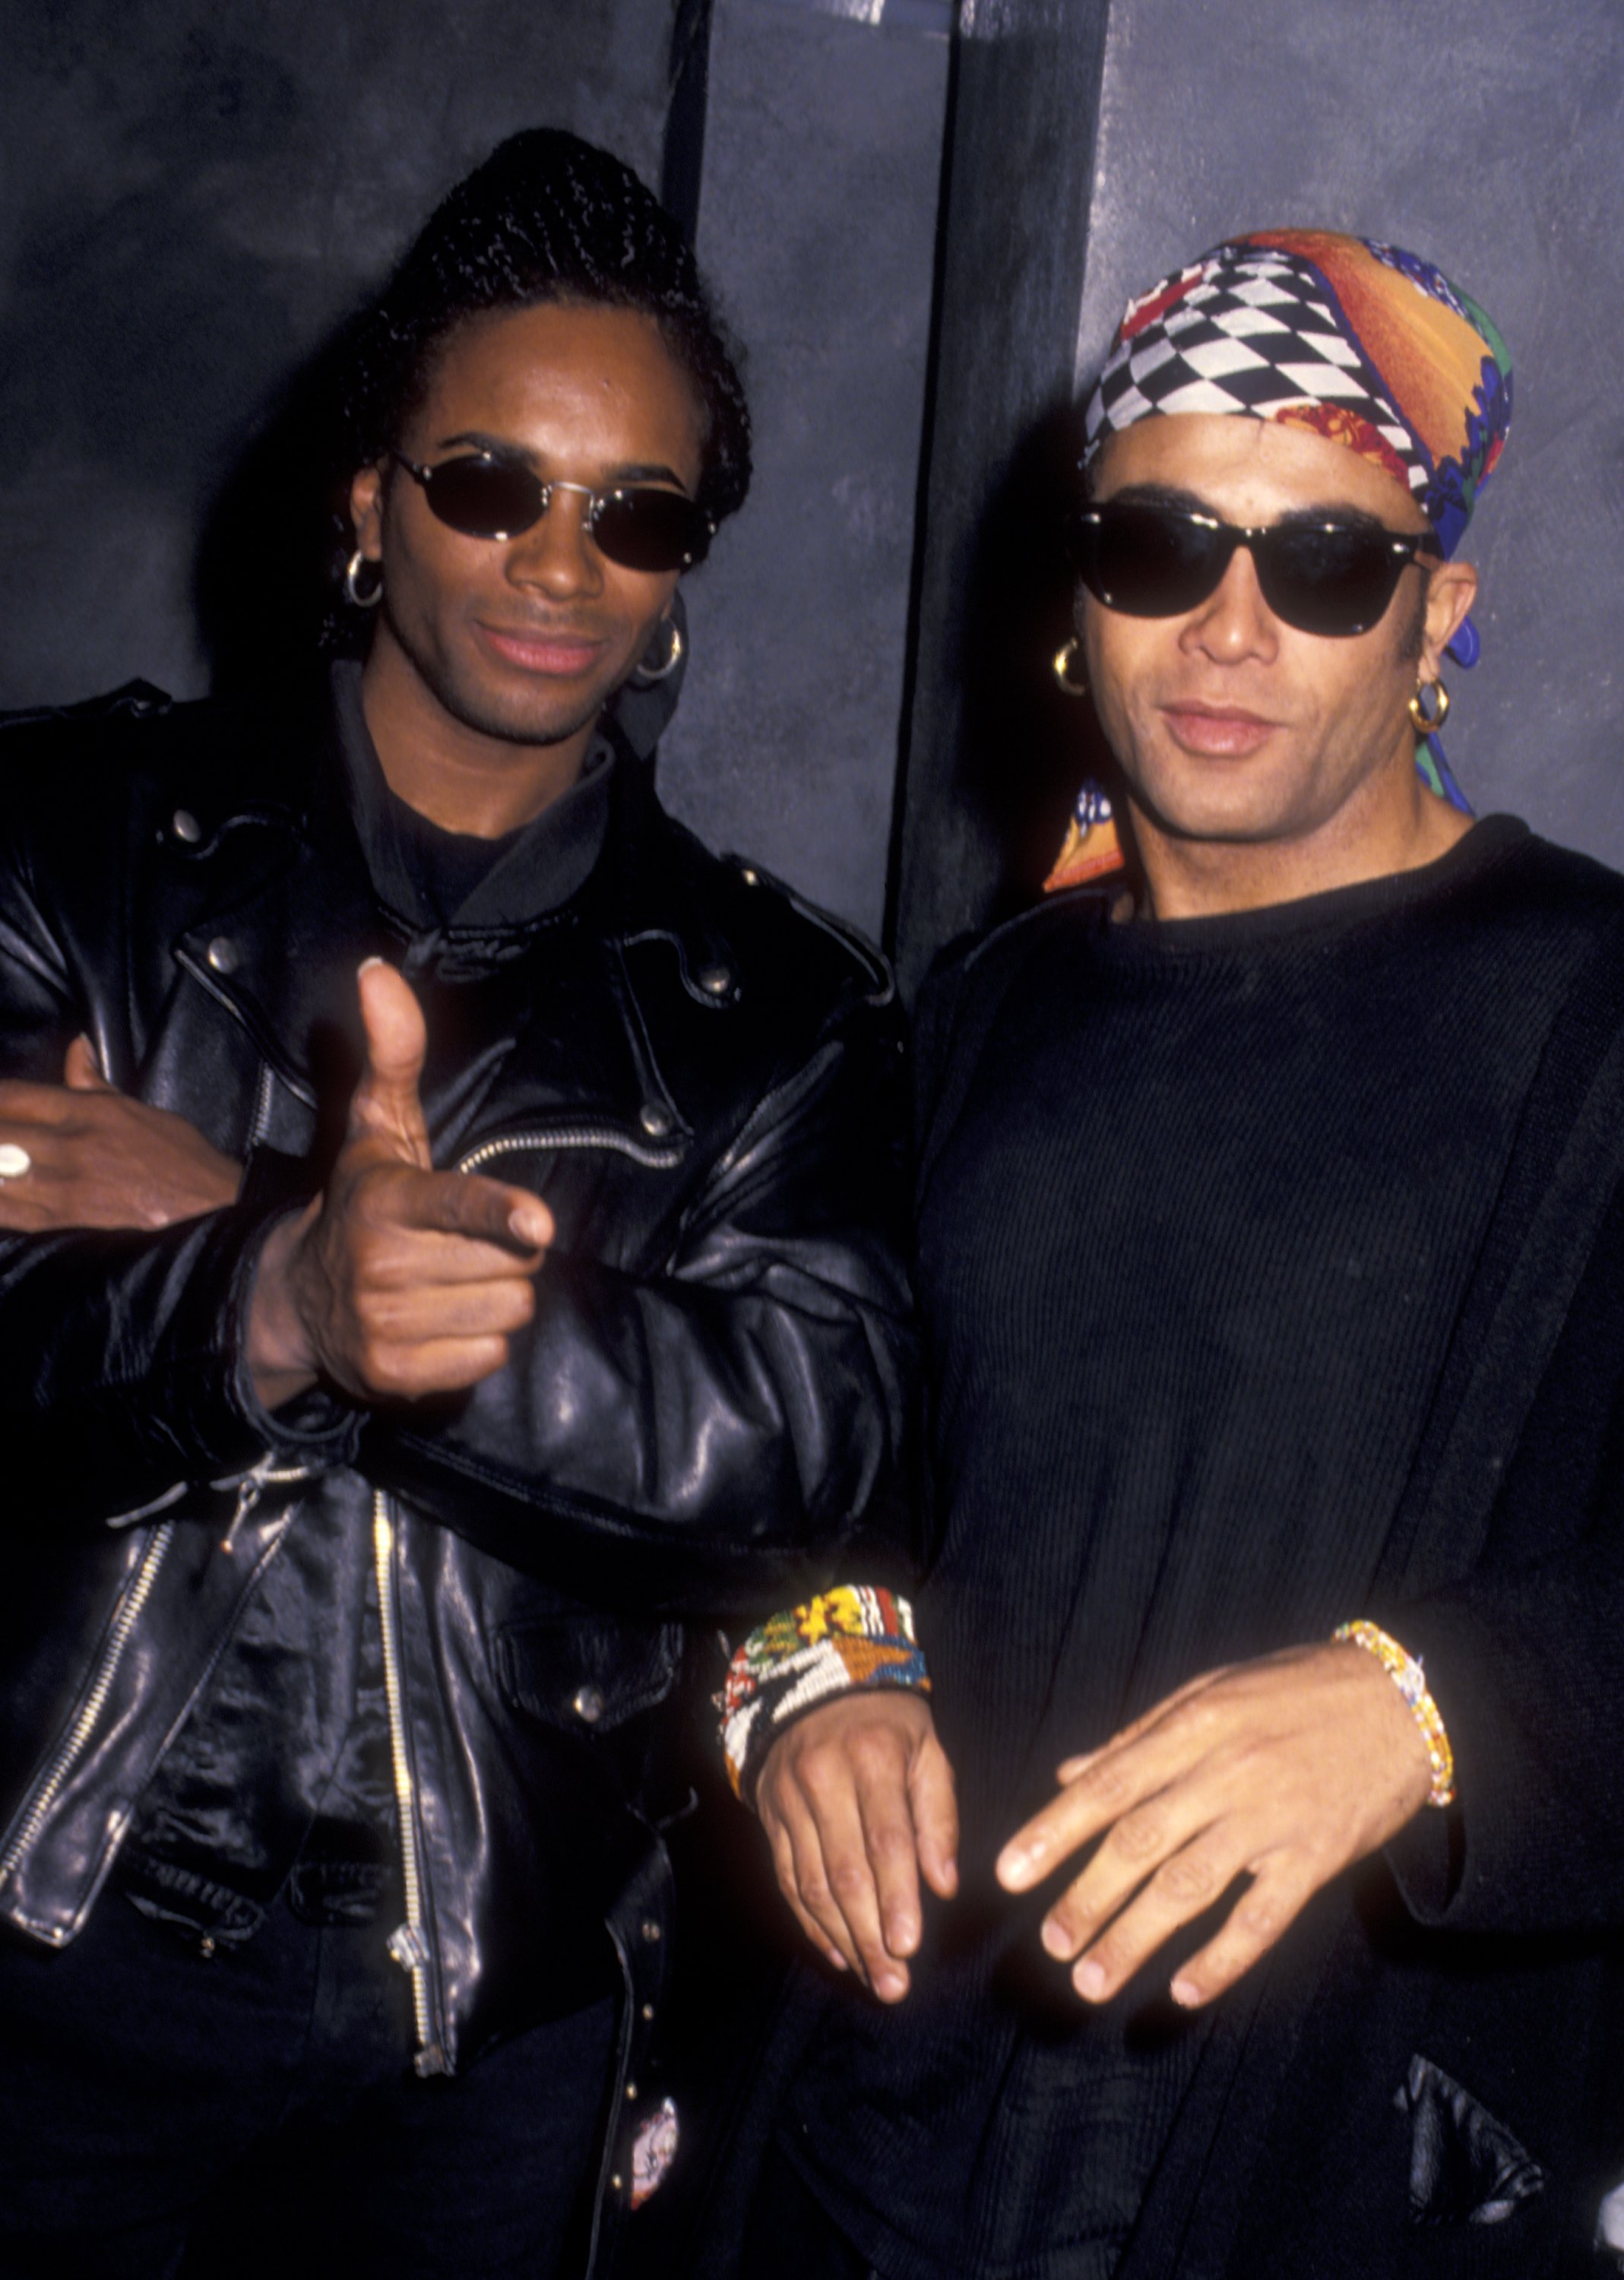 Rob Pilatus and Fab Morvan of Milli Vanilli attend Milli Vanilli Performance on April 7, 1993 at Limelight in New York City. | Photo: GettyImages